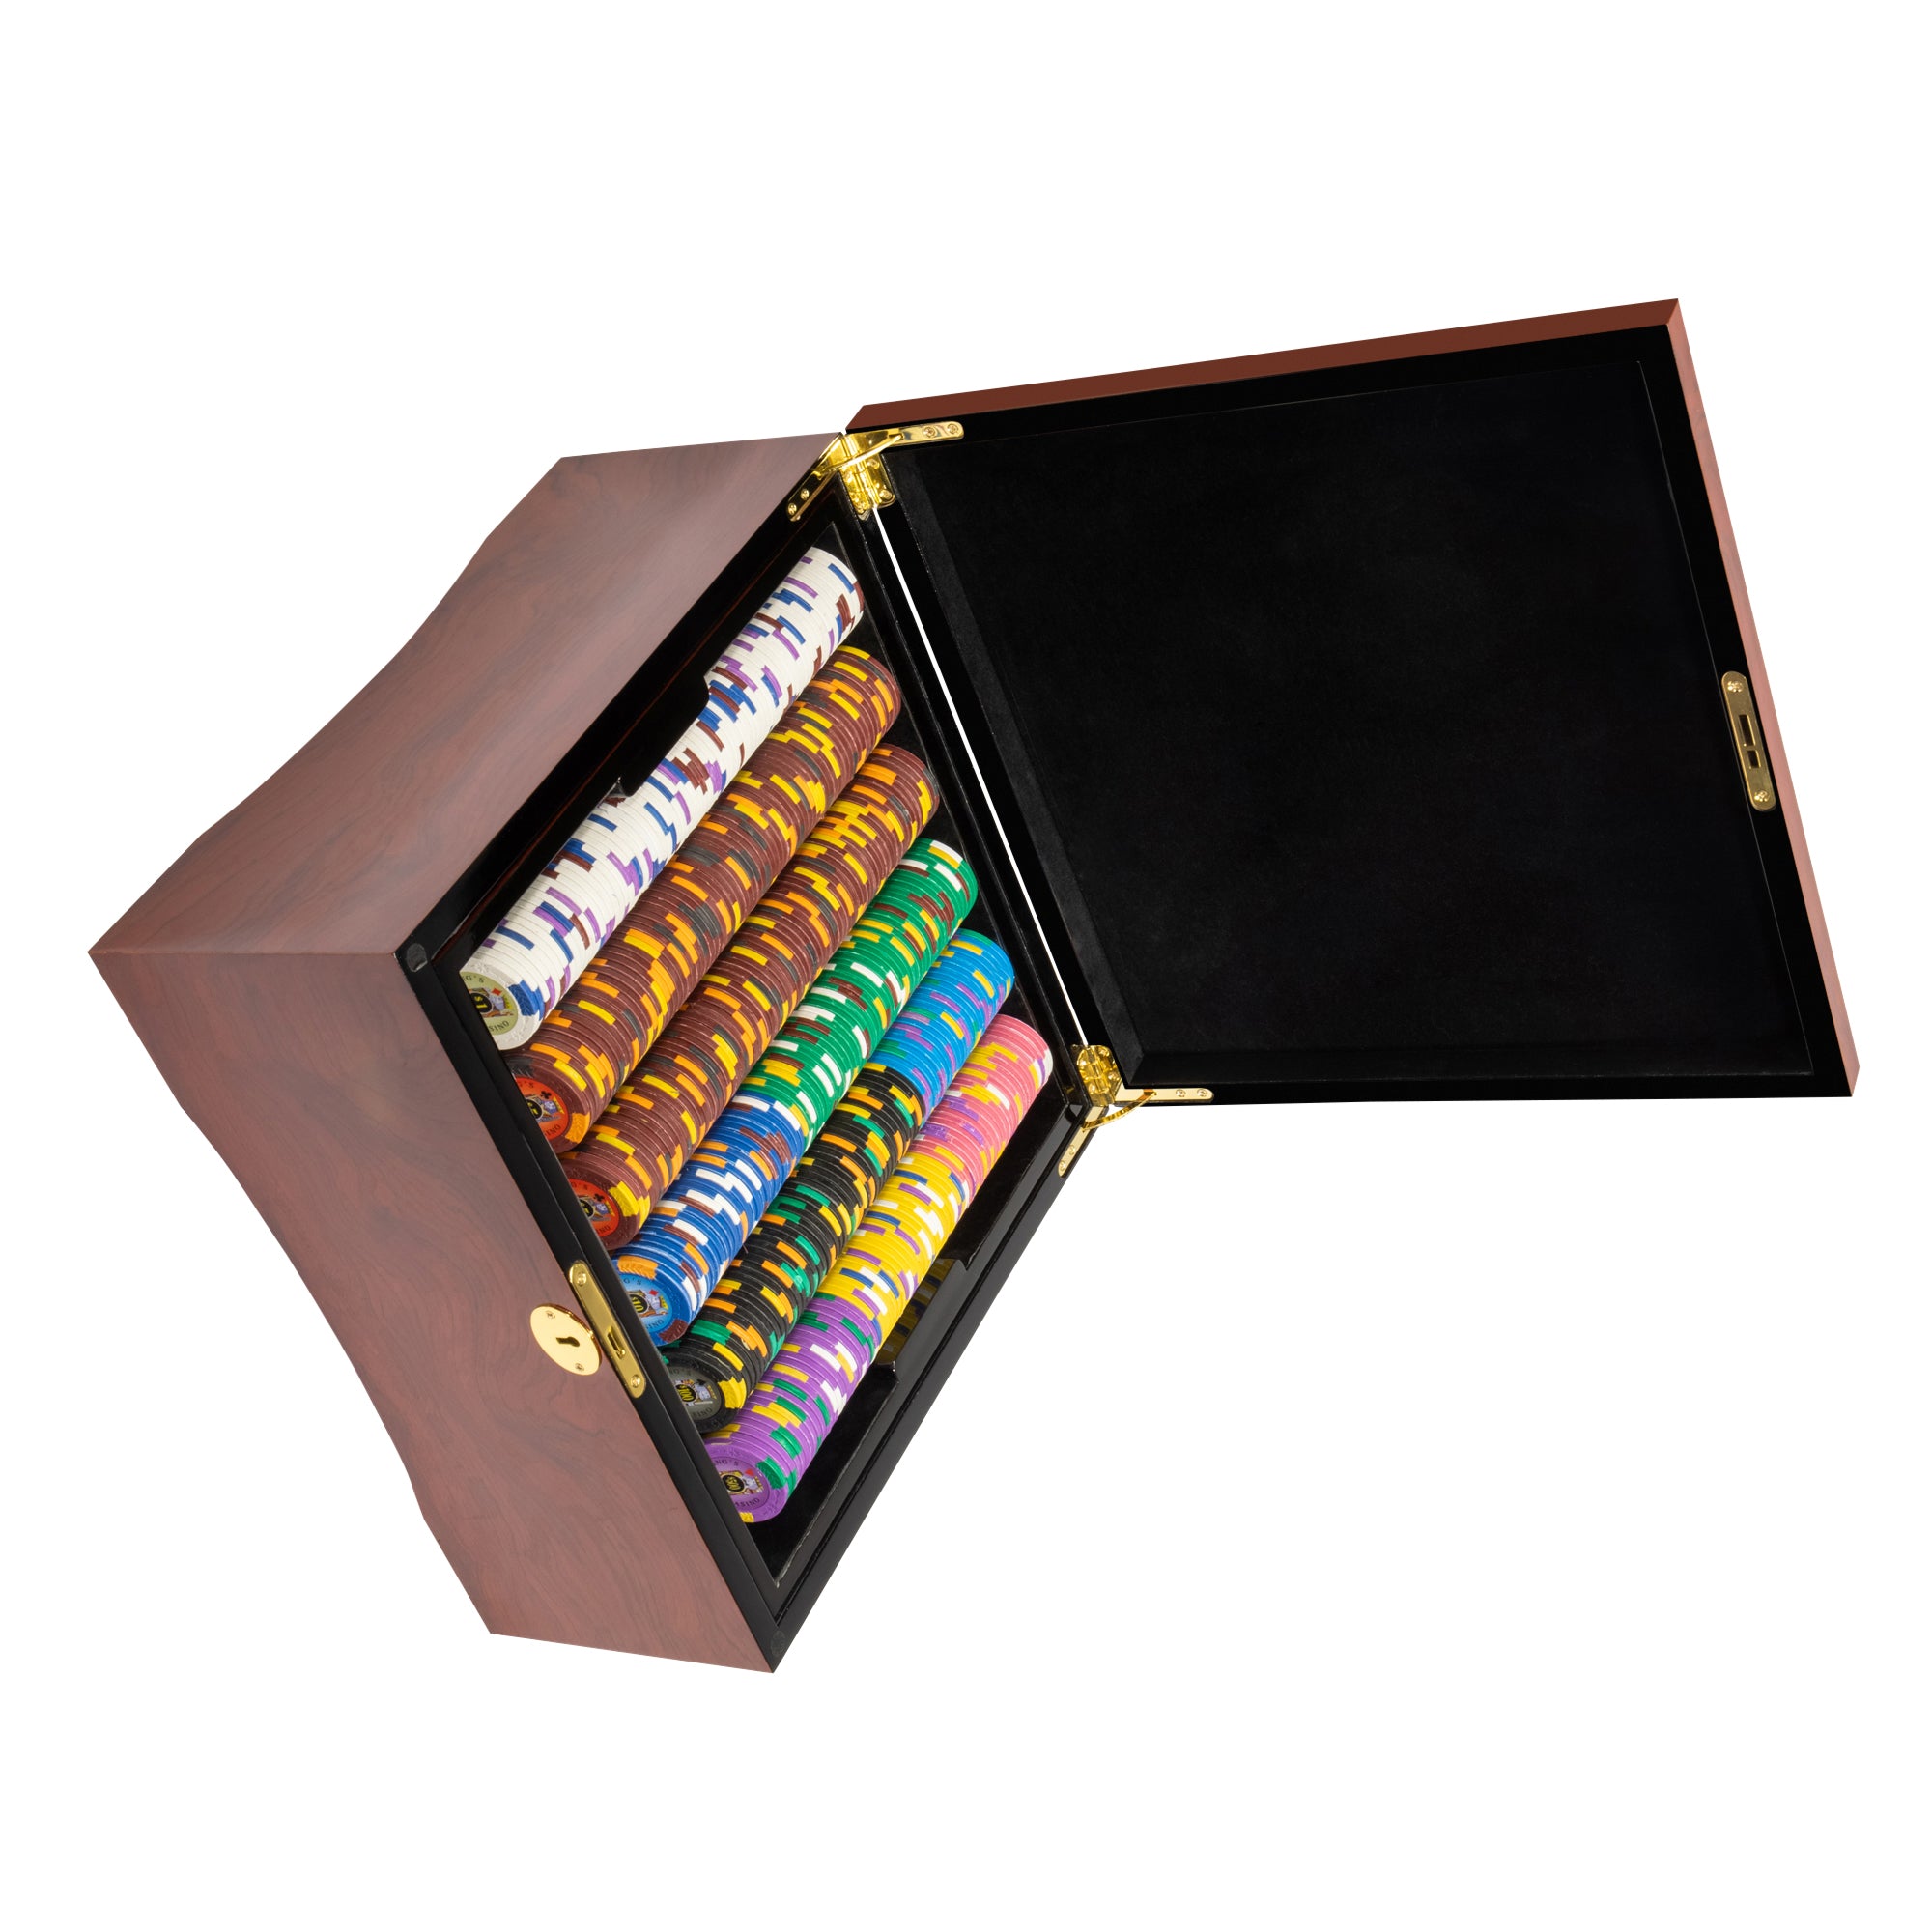 King's Casino 14-gram Poker Chip Set in Mahogany Wood Case (750 Count) - Clay Composite